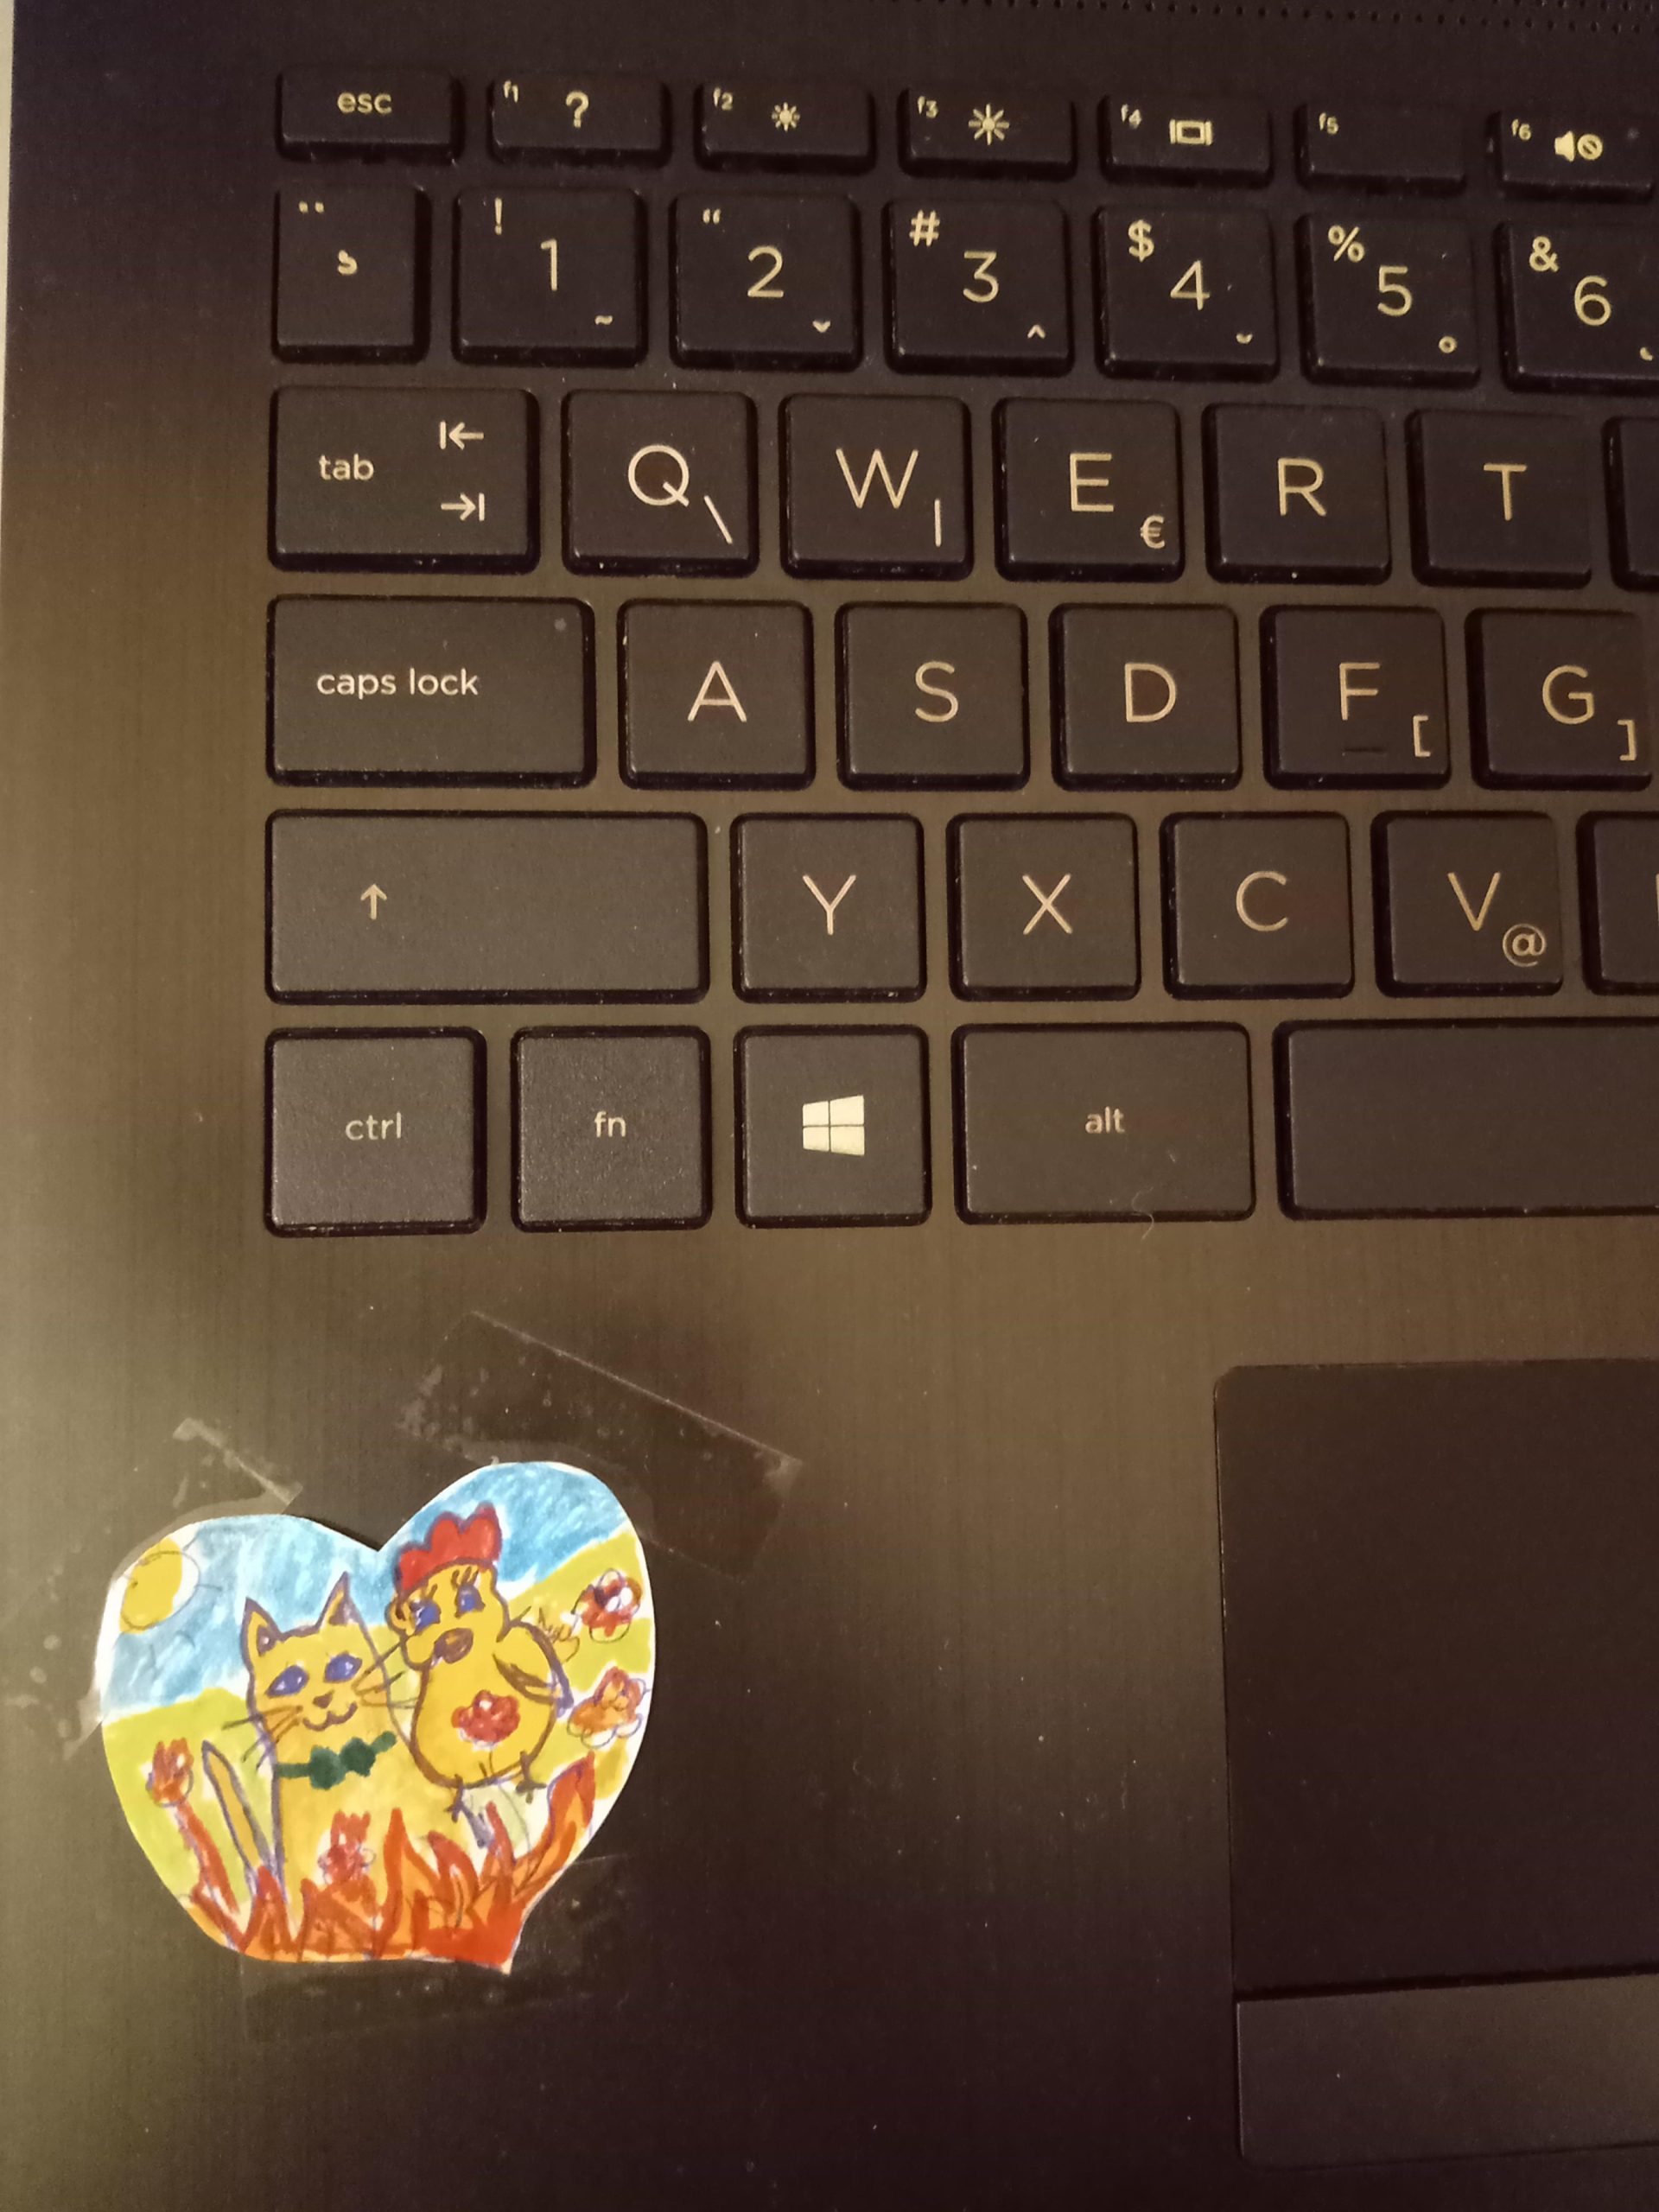 I made this sticky label for my boyfriend’s notebook computer